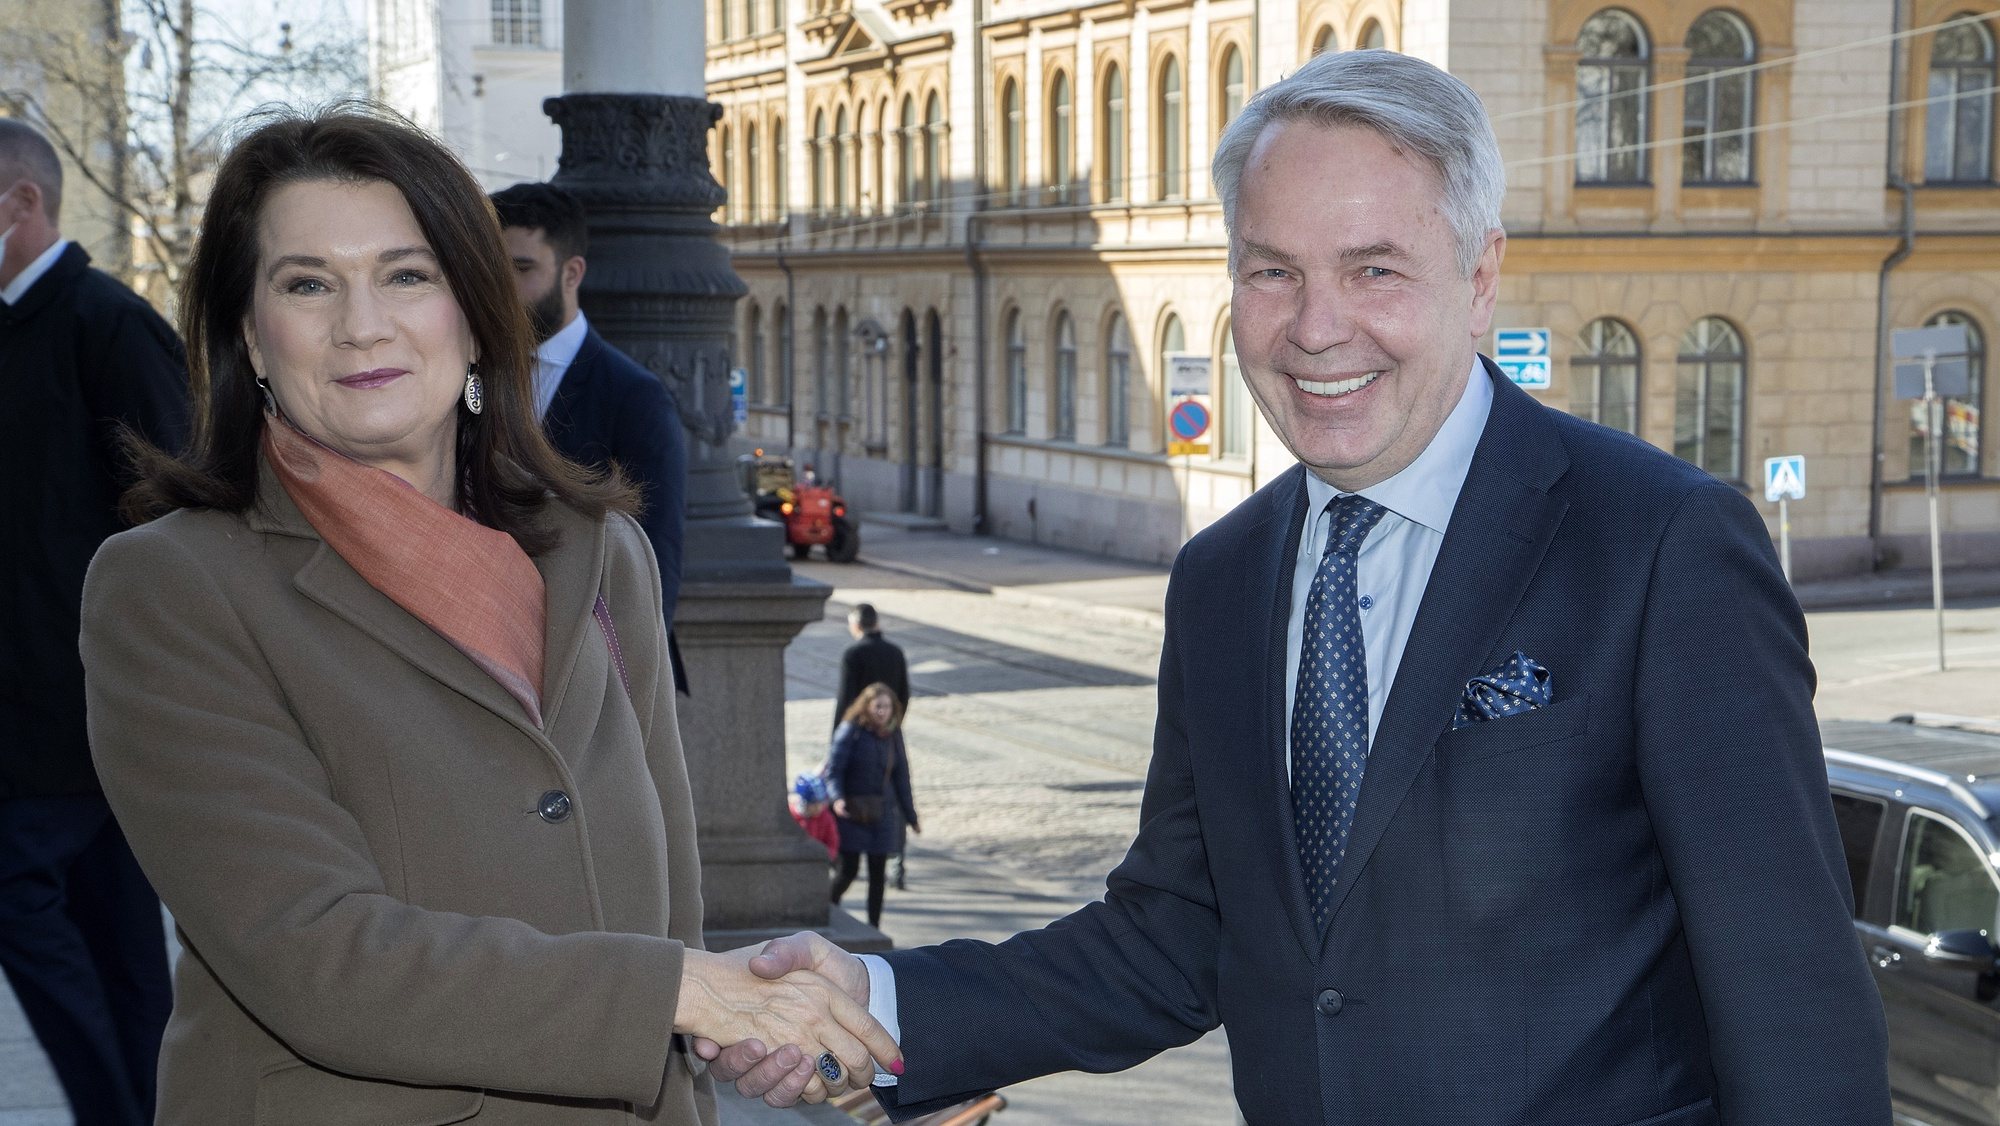 epa09915972 Sweden&#039;s Foreign Minister Ann Linde (L) shakes hands with Finland&#039;s Foreign Minister Pekka Haavisto in Helsinki, Finland, 29 April 2022. The Foreign Ministers will discuss, among other things, topical foreign and security policy questions and Russia’s invasion of Ukraine, according to the Finnish government&#039;s website.  EPA/MAURI RATILAINEN